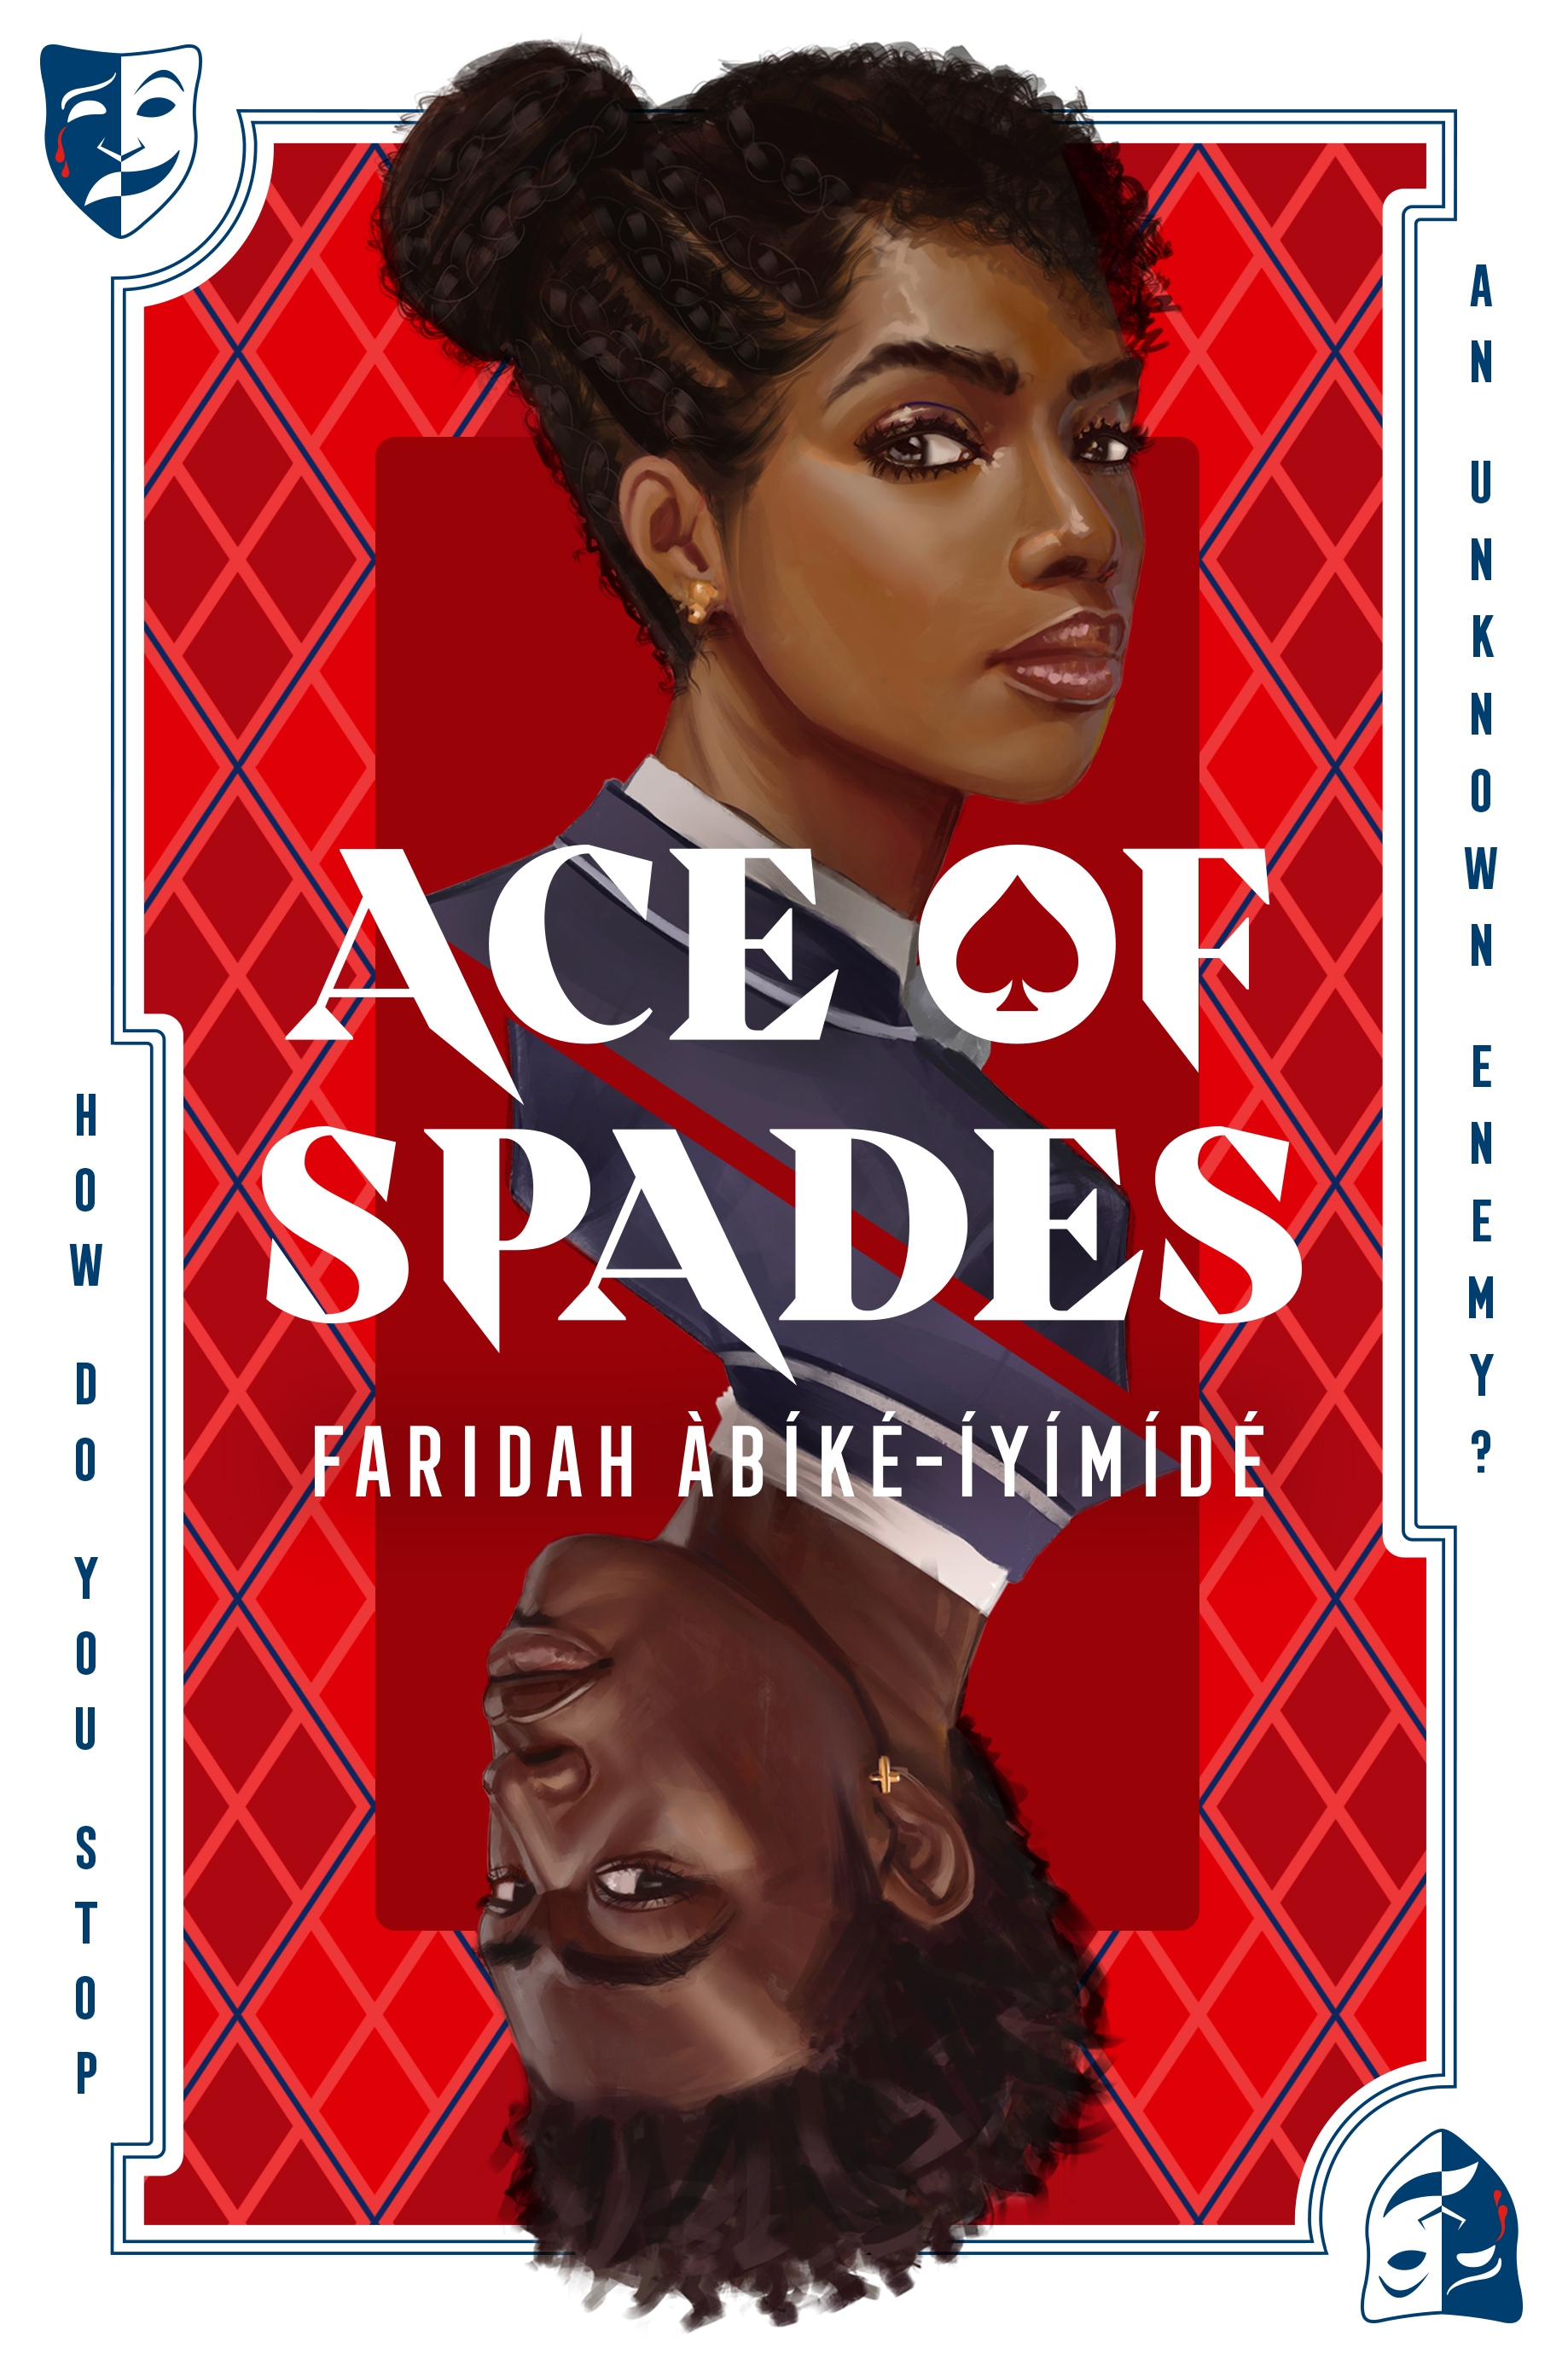 Ace of Spades cover image